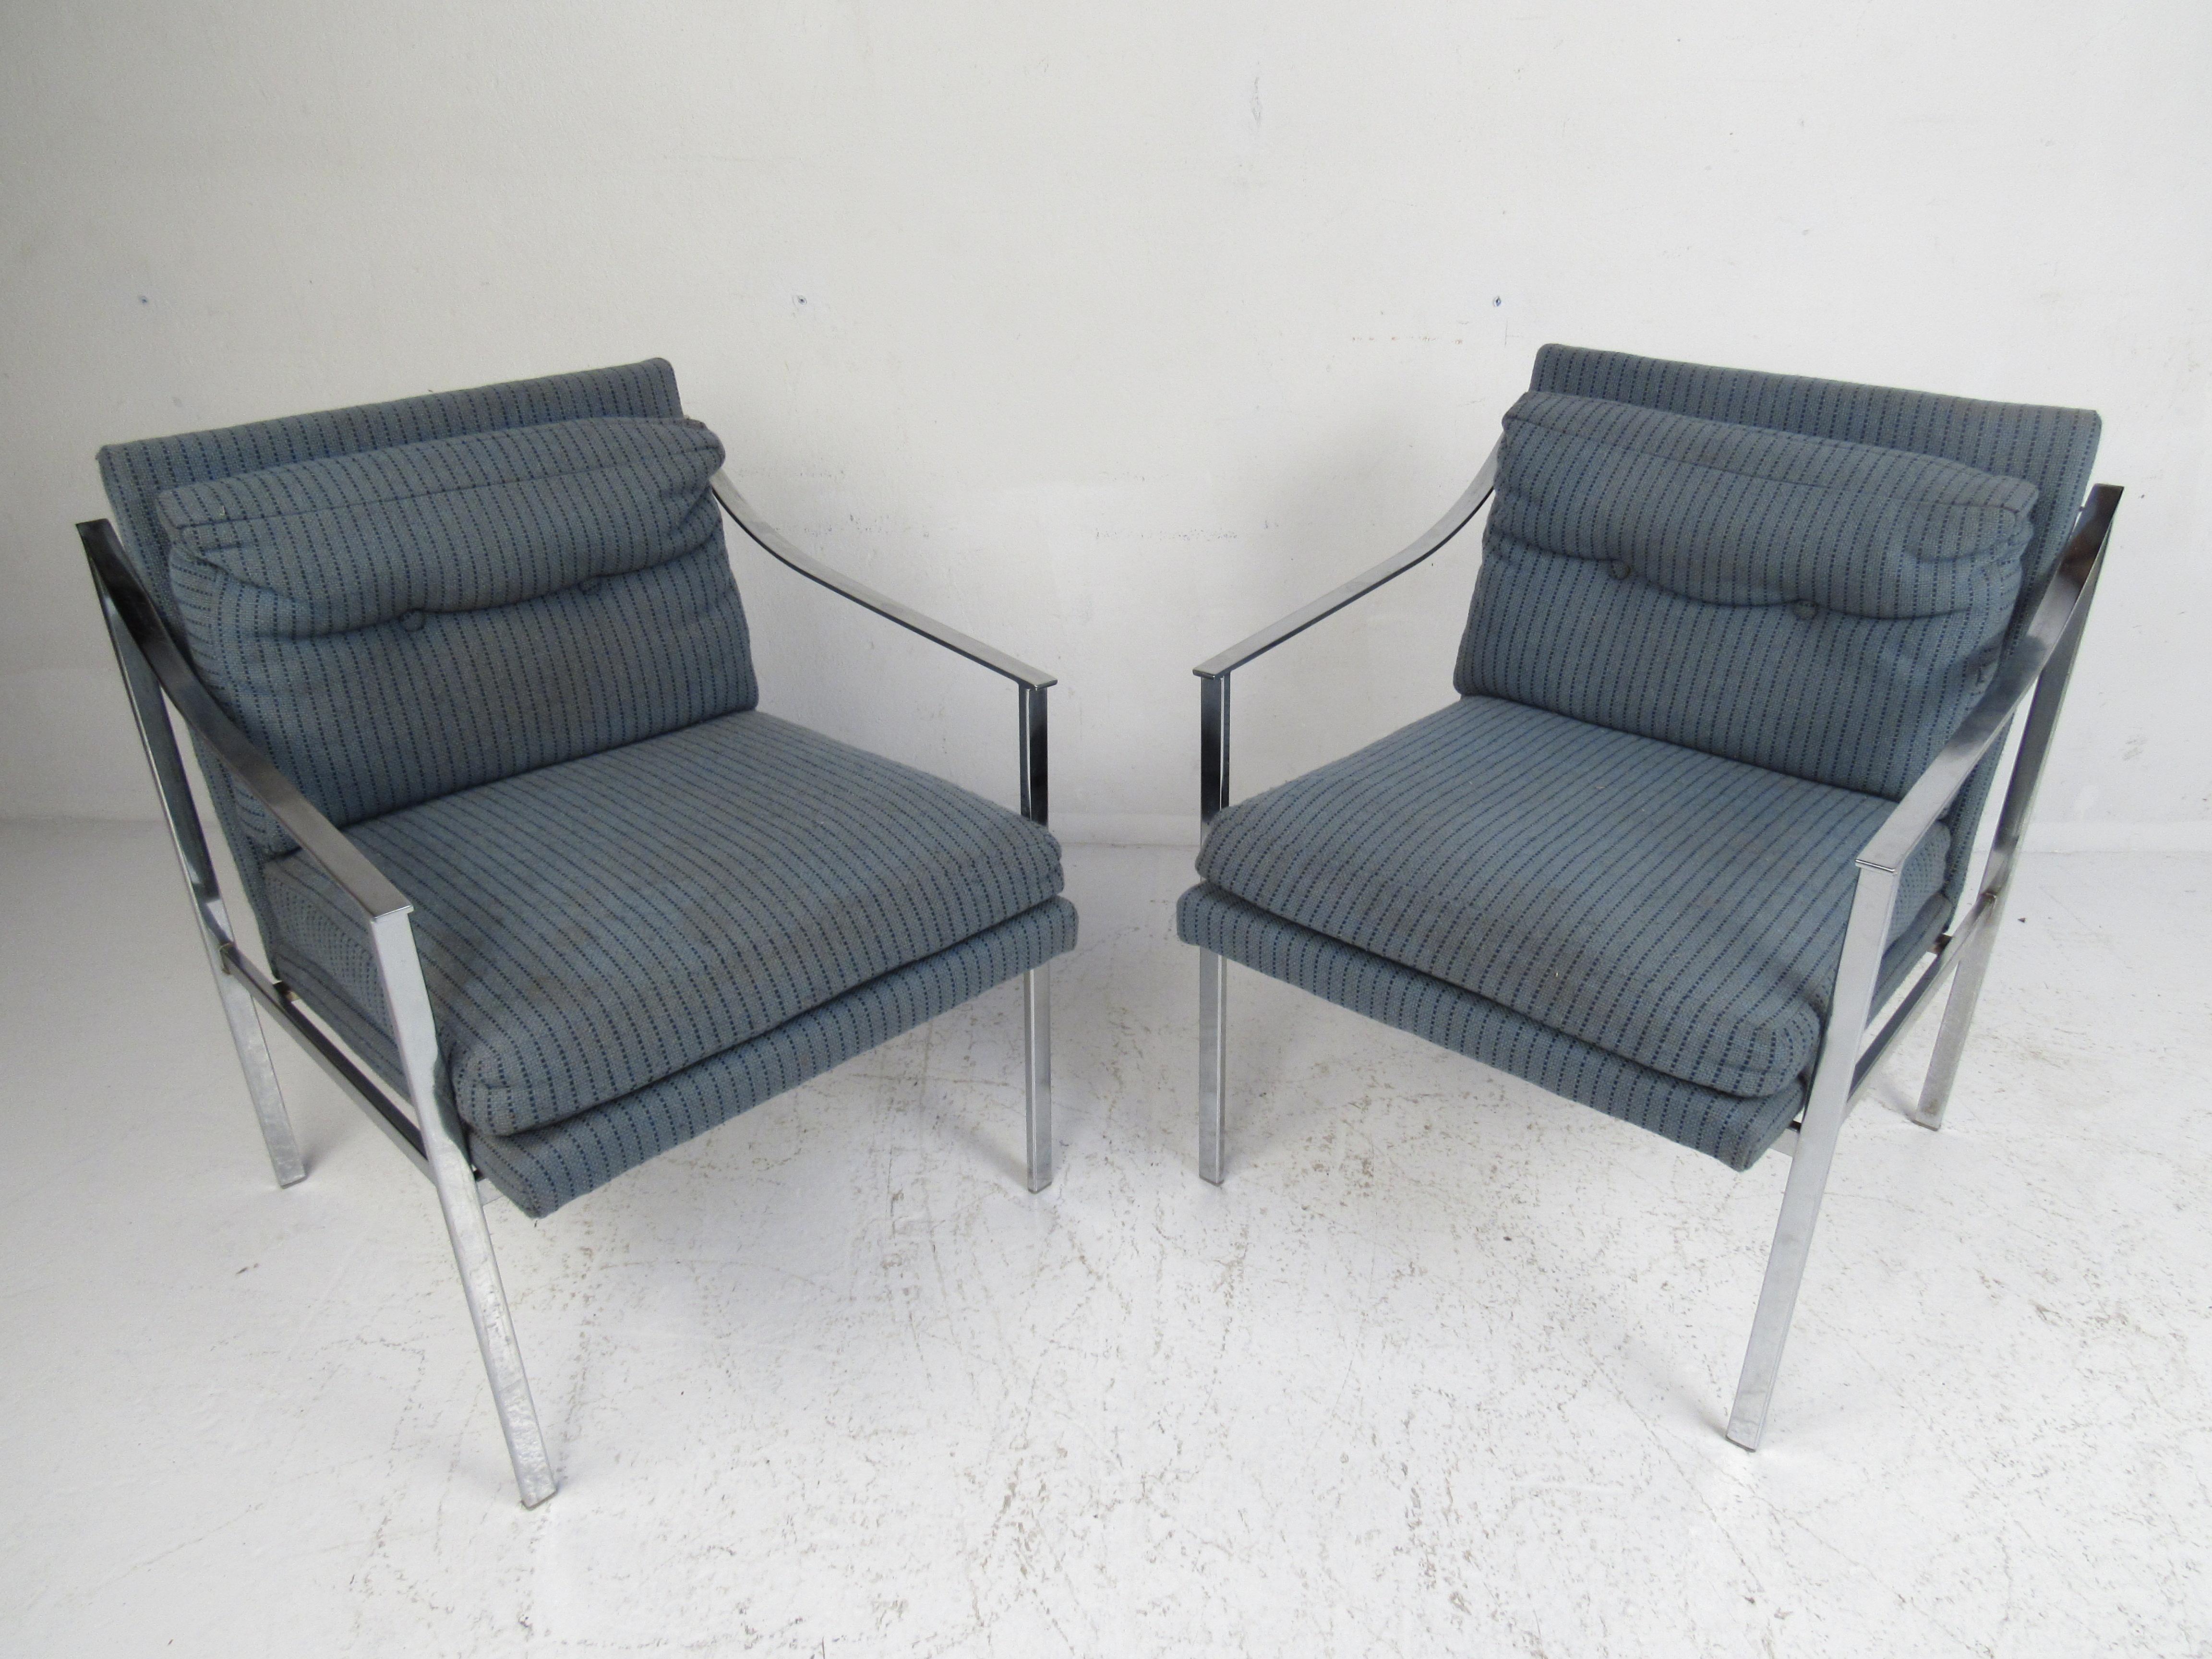 This stunning vintage modern pair of lounge chairs feature a heavy flat bar chrome frame and thick padded seats. The unique sloped armrests and tufted backrest add to the midcentury appeal. This exquisite pair of Milo Baughman style lounge chairs